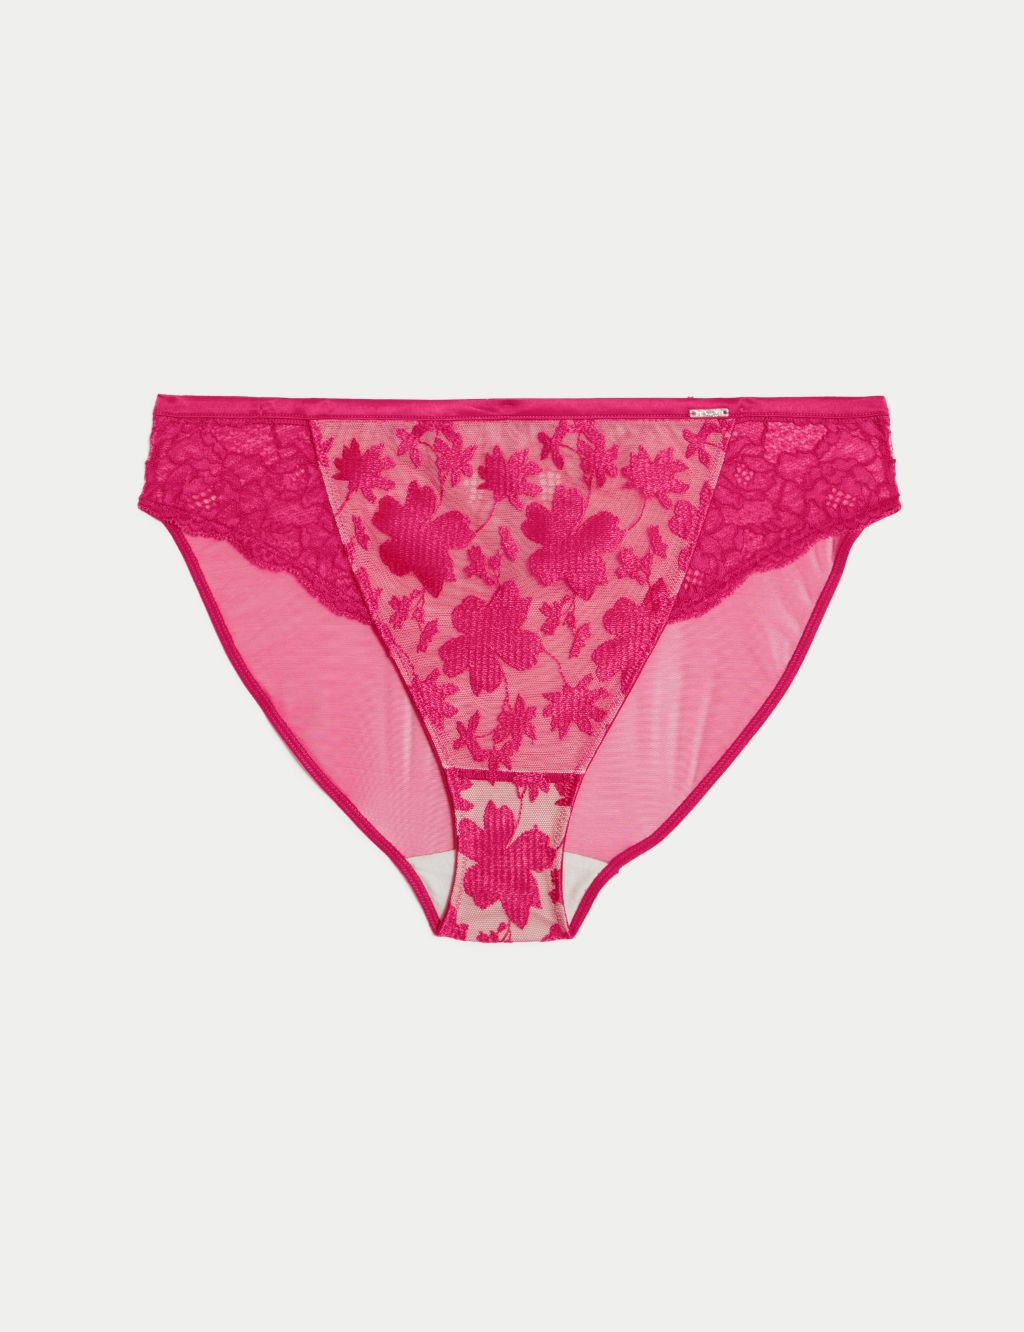 Cosmos Embroidery High Leg Knickers image 2